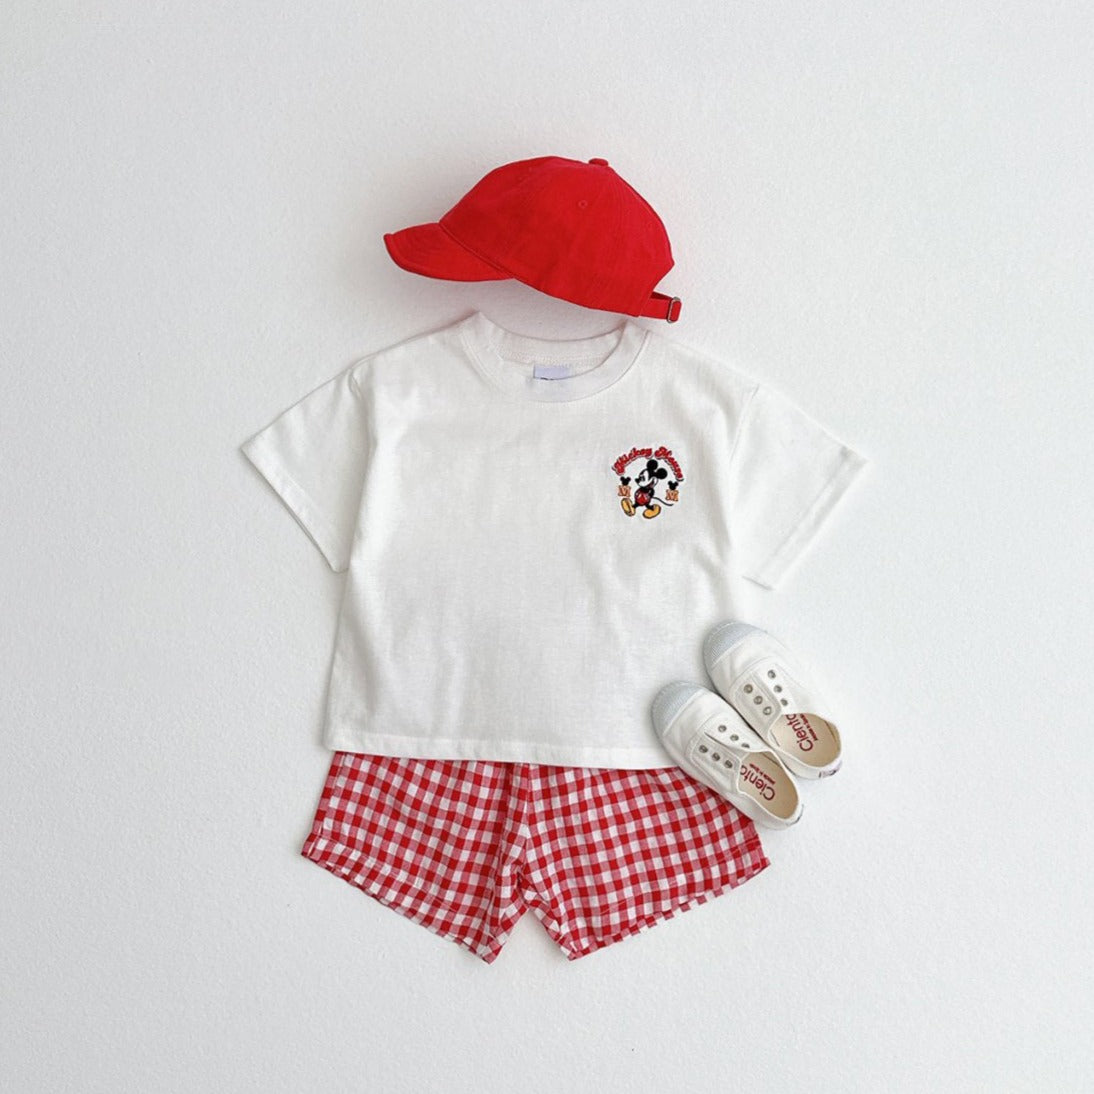 Toddler Gingham Shorts (1-5y) - Red - AT NOON STORE